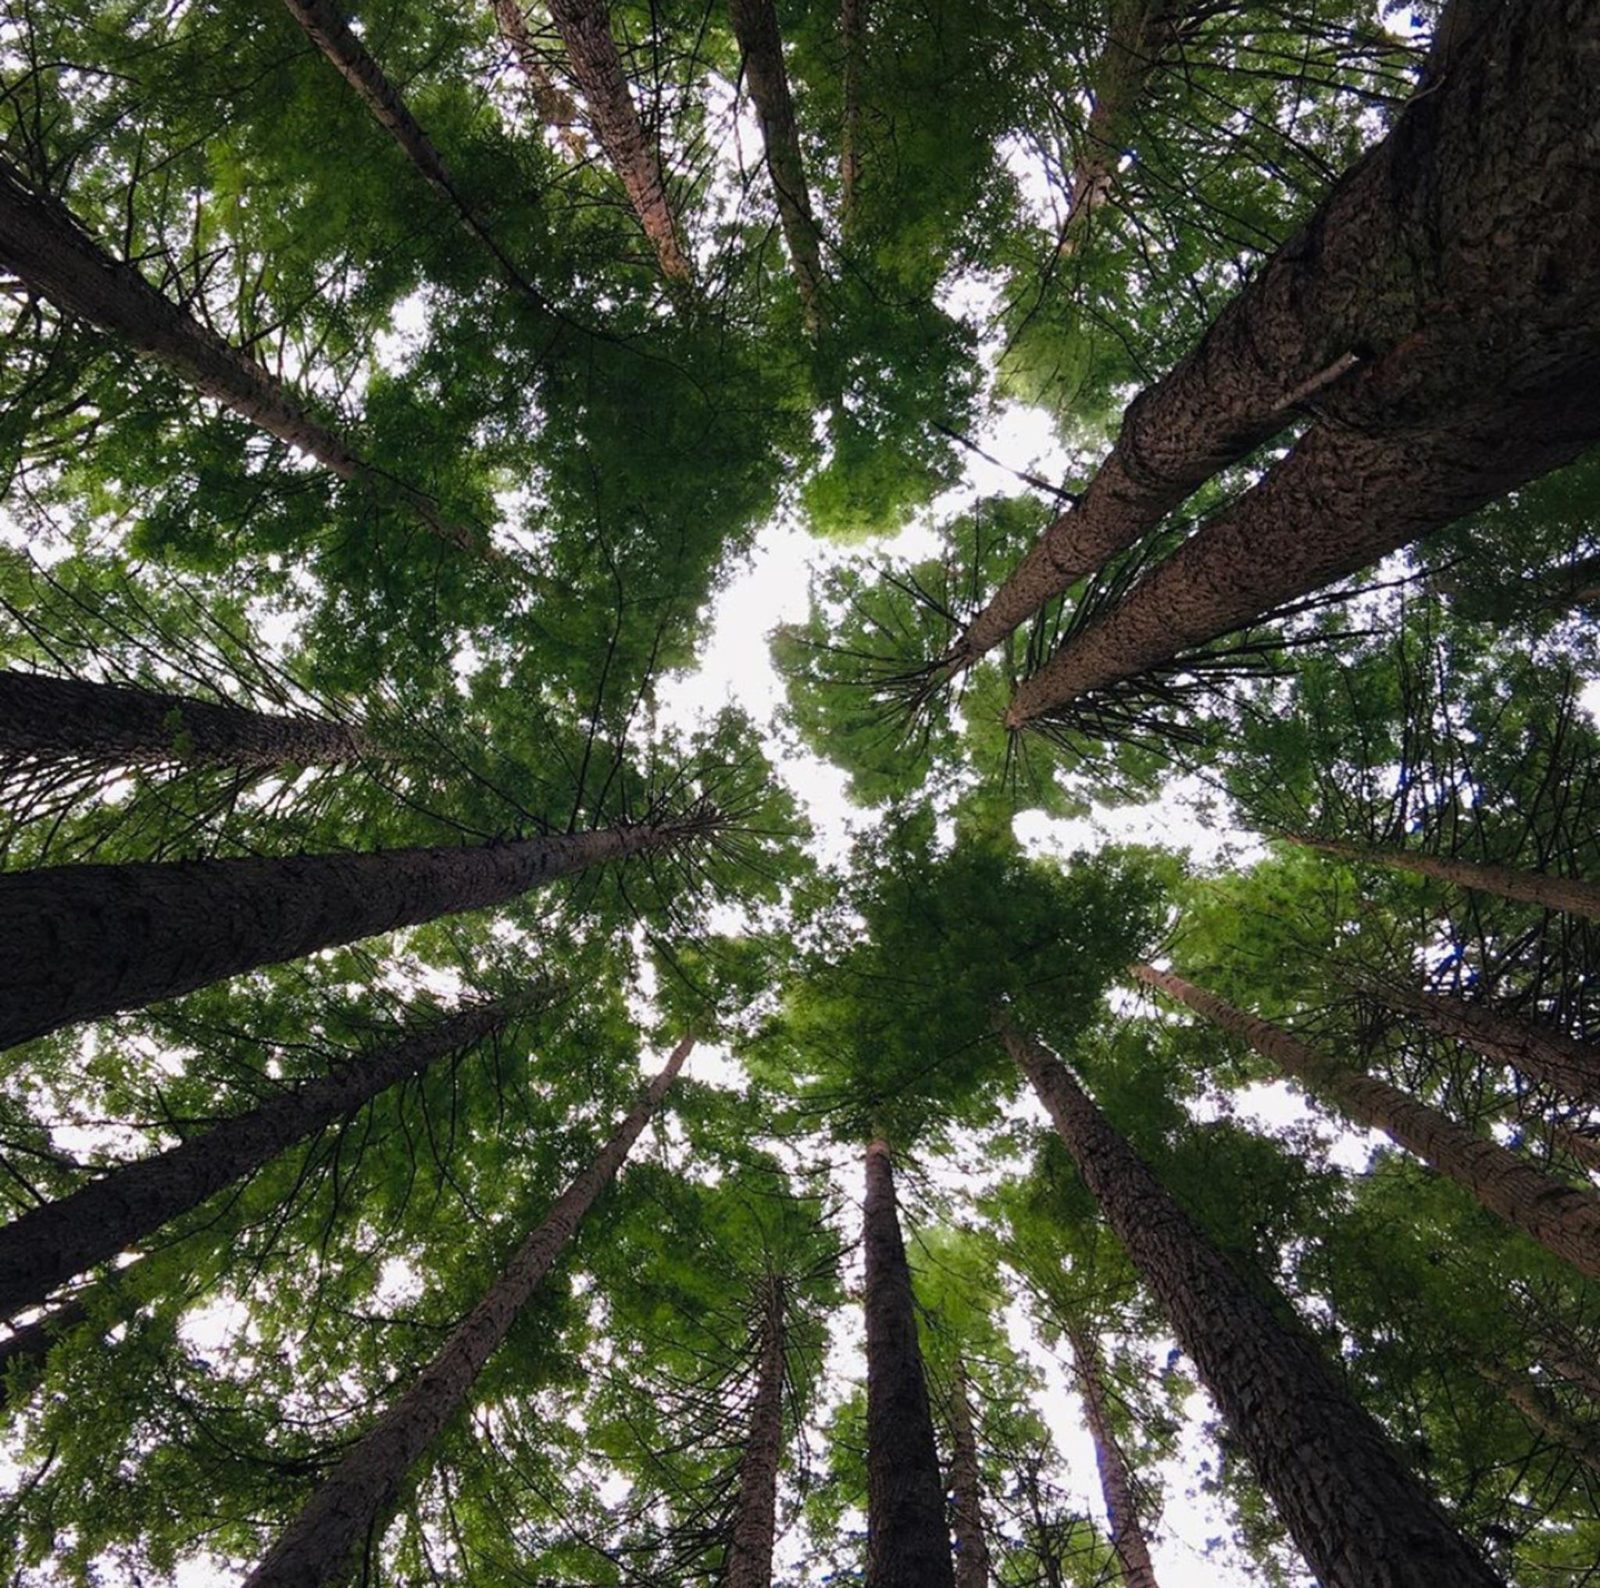 looking up a the tall trees